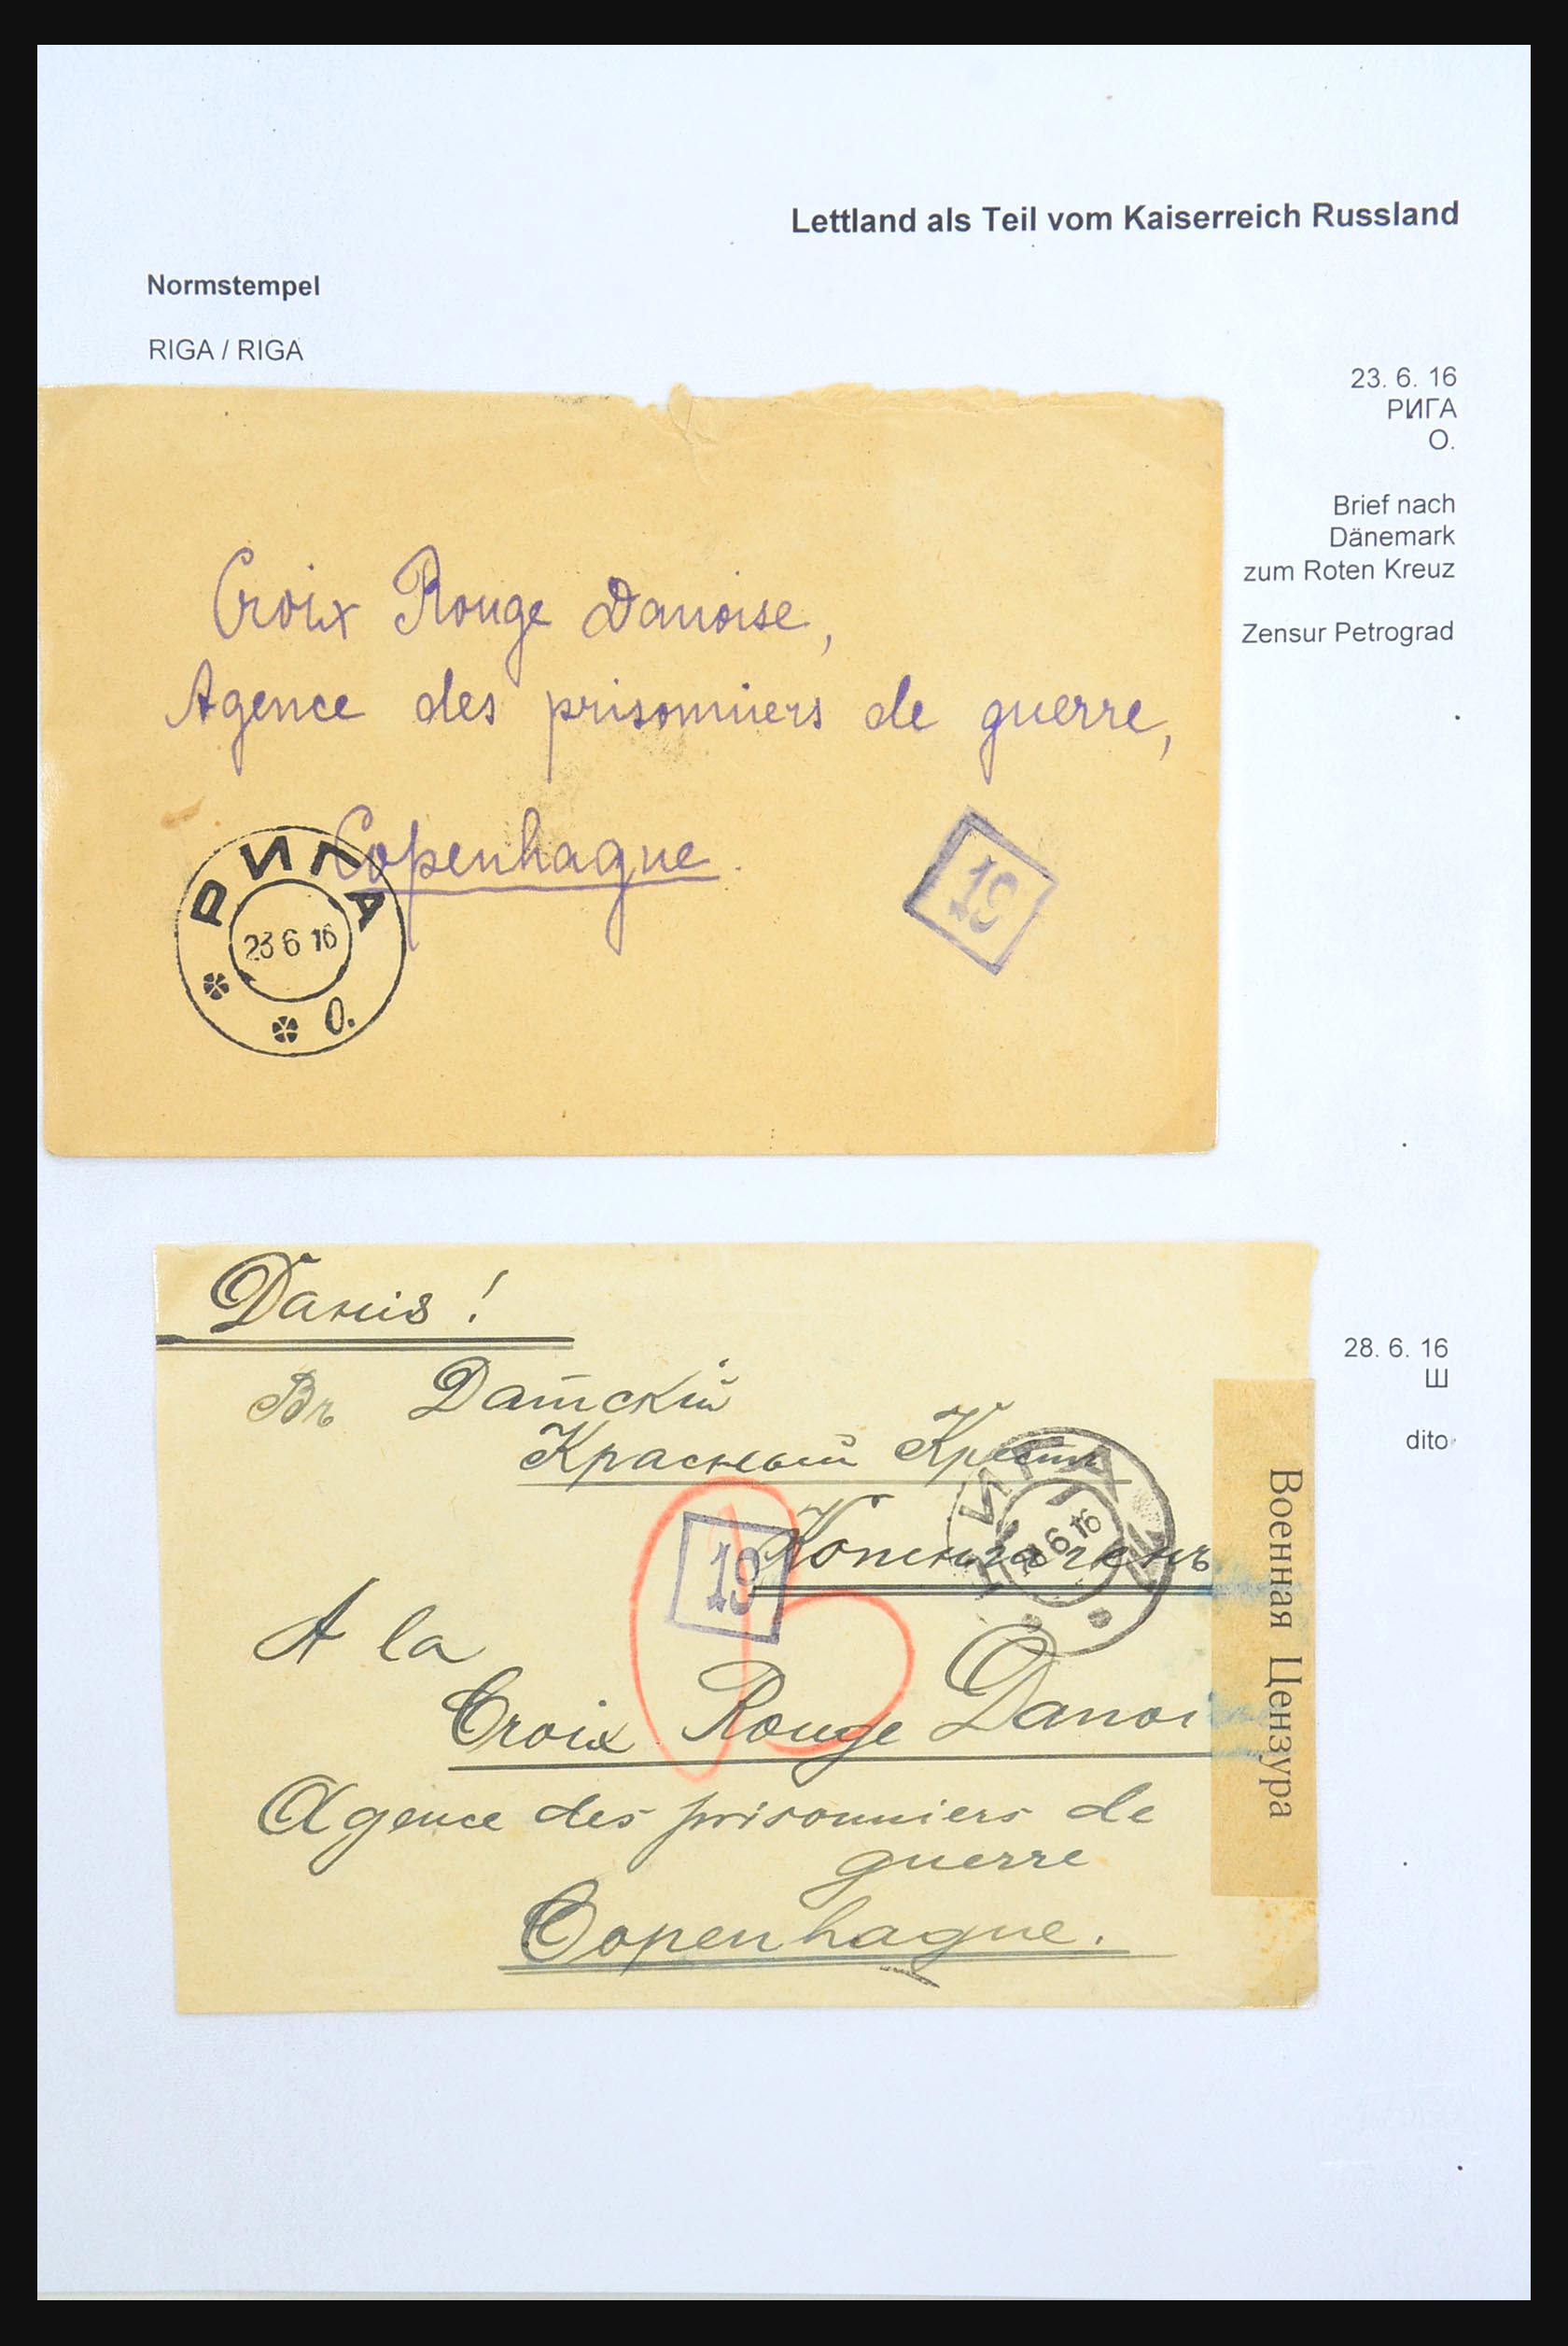 31305 084 - 31305 Latvia as part of Russia 1817-1918.